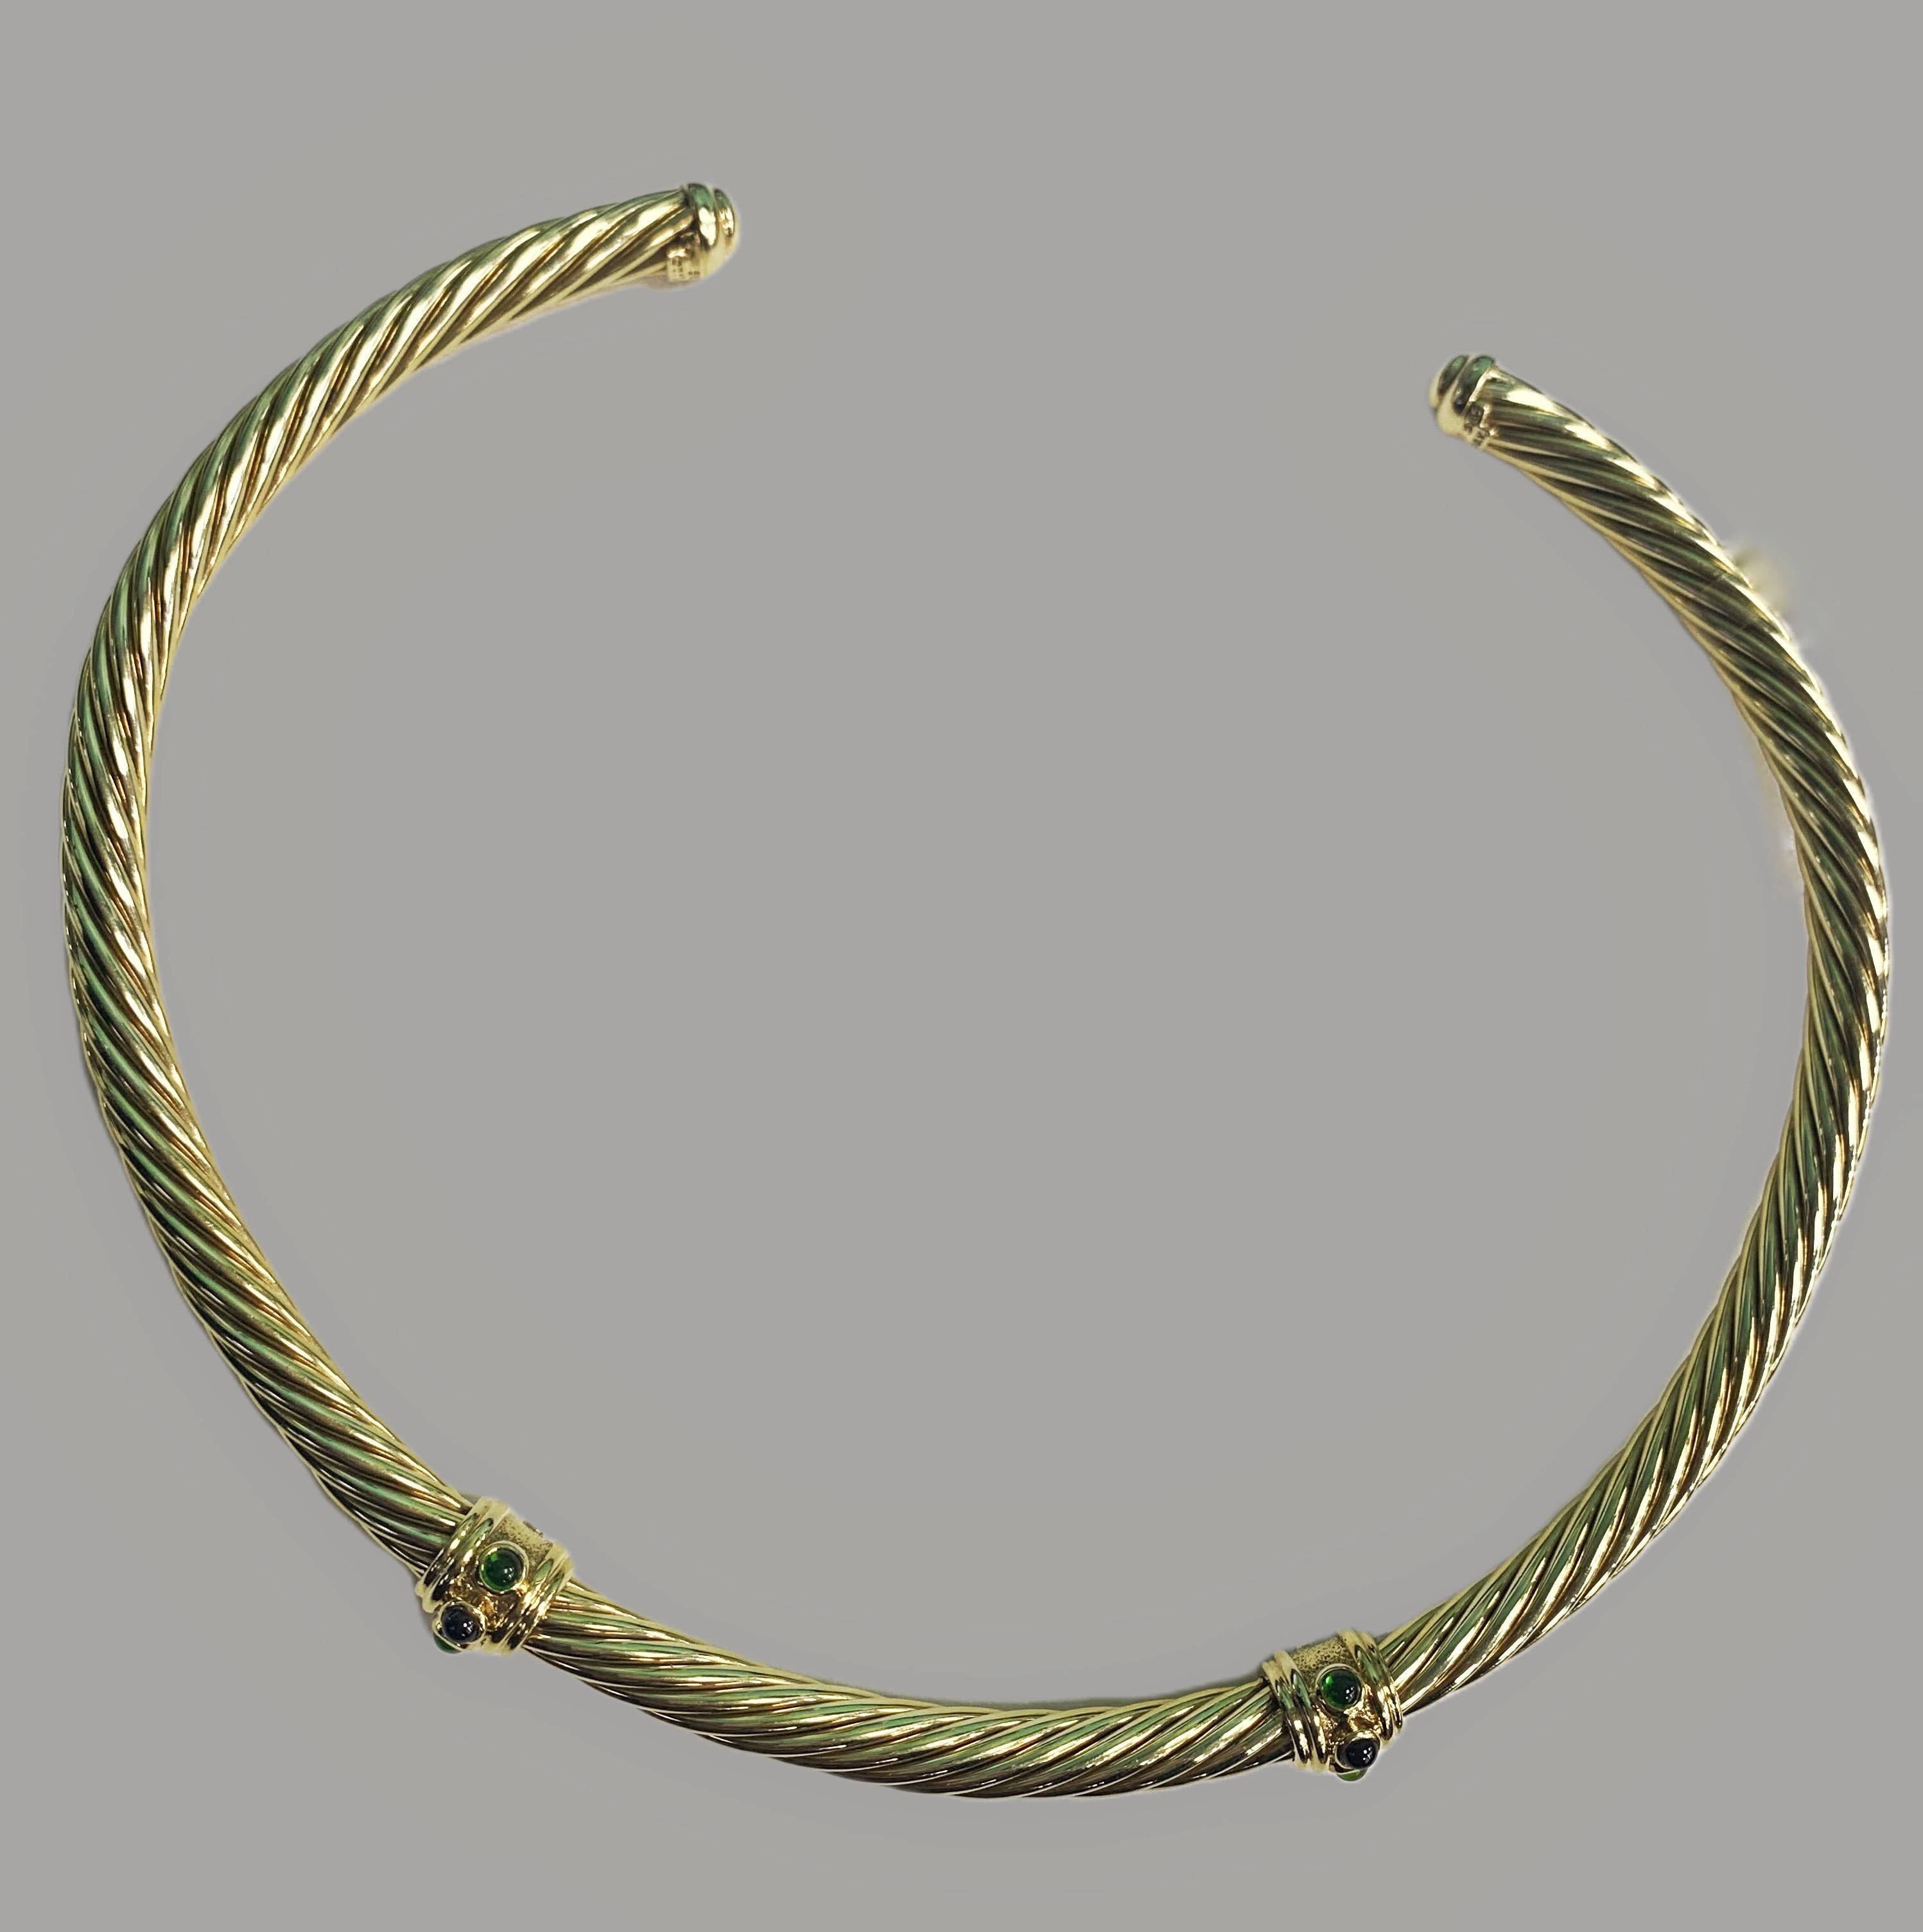 This beautiful David Yurman 14 Karat Yellow Gold Renaissance choker necklace was designed in their signature cable design. The choker necklace features two stations of alternating cabochon peridots with garnets. It is 7 millimeters in width and